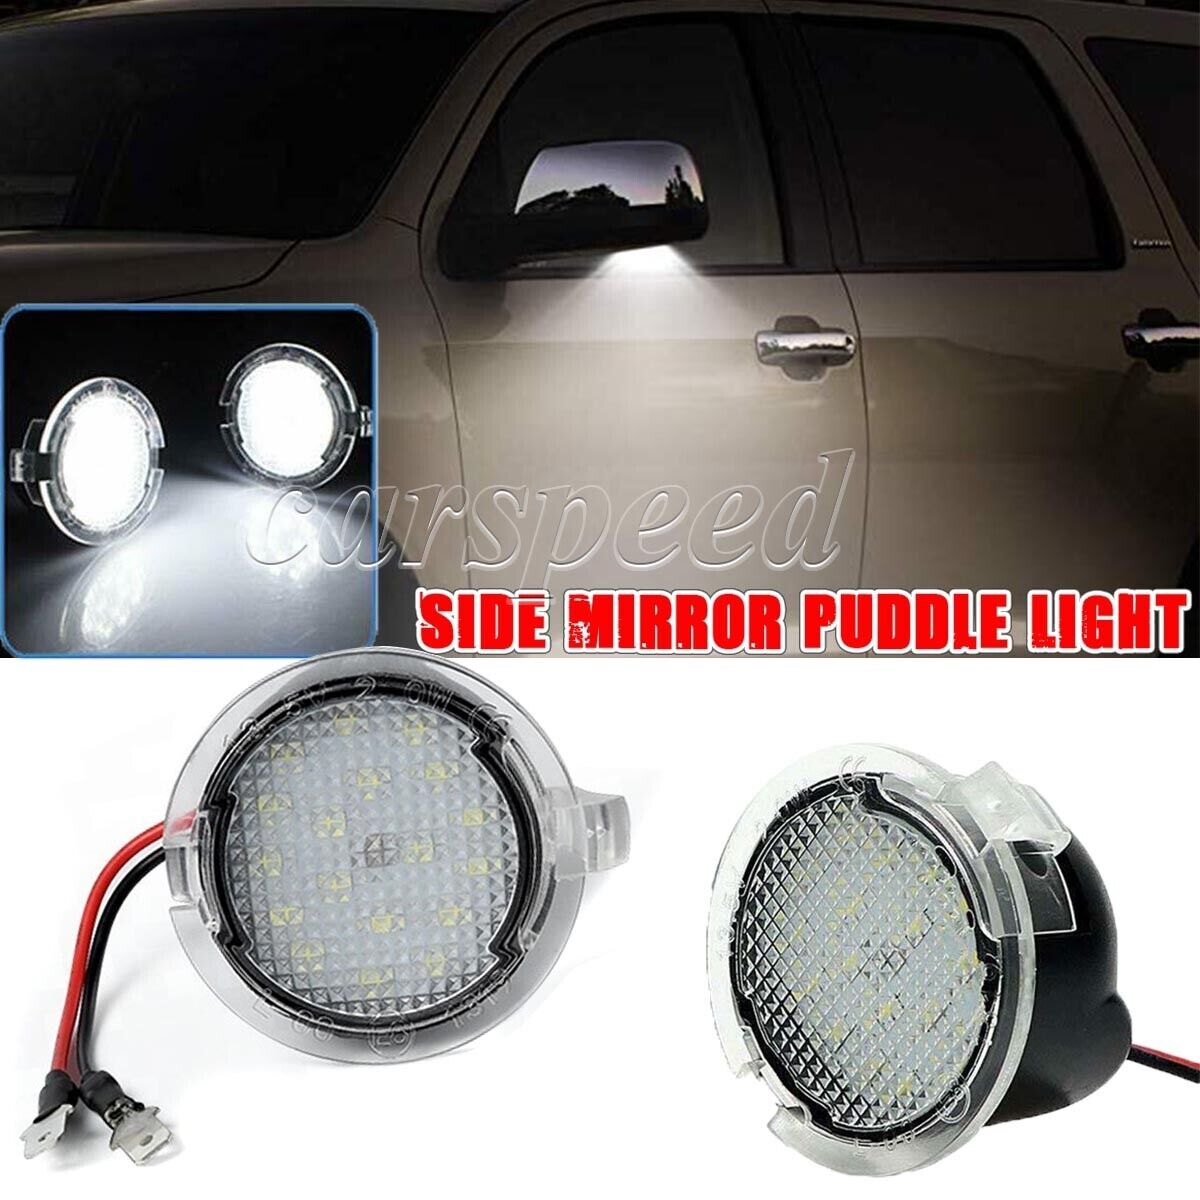 LED Side Mirror Puddle Light Kit For Ford F-150 Explorer Expedition Edge Taurus